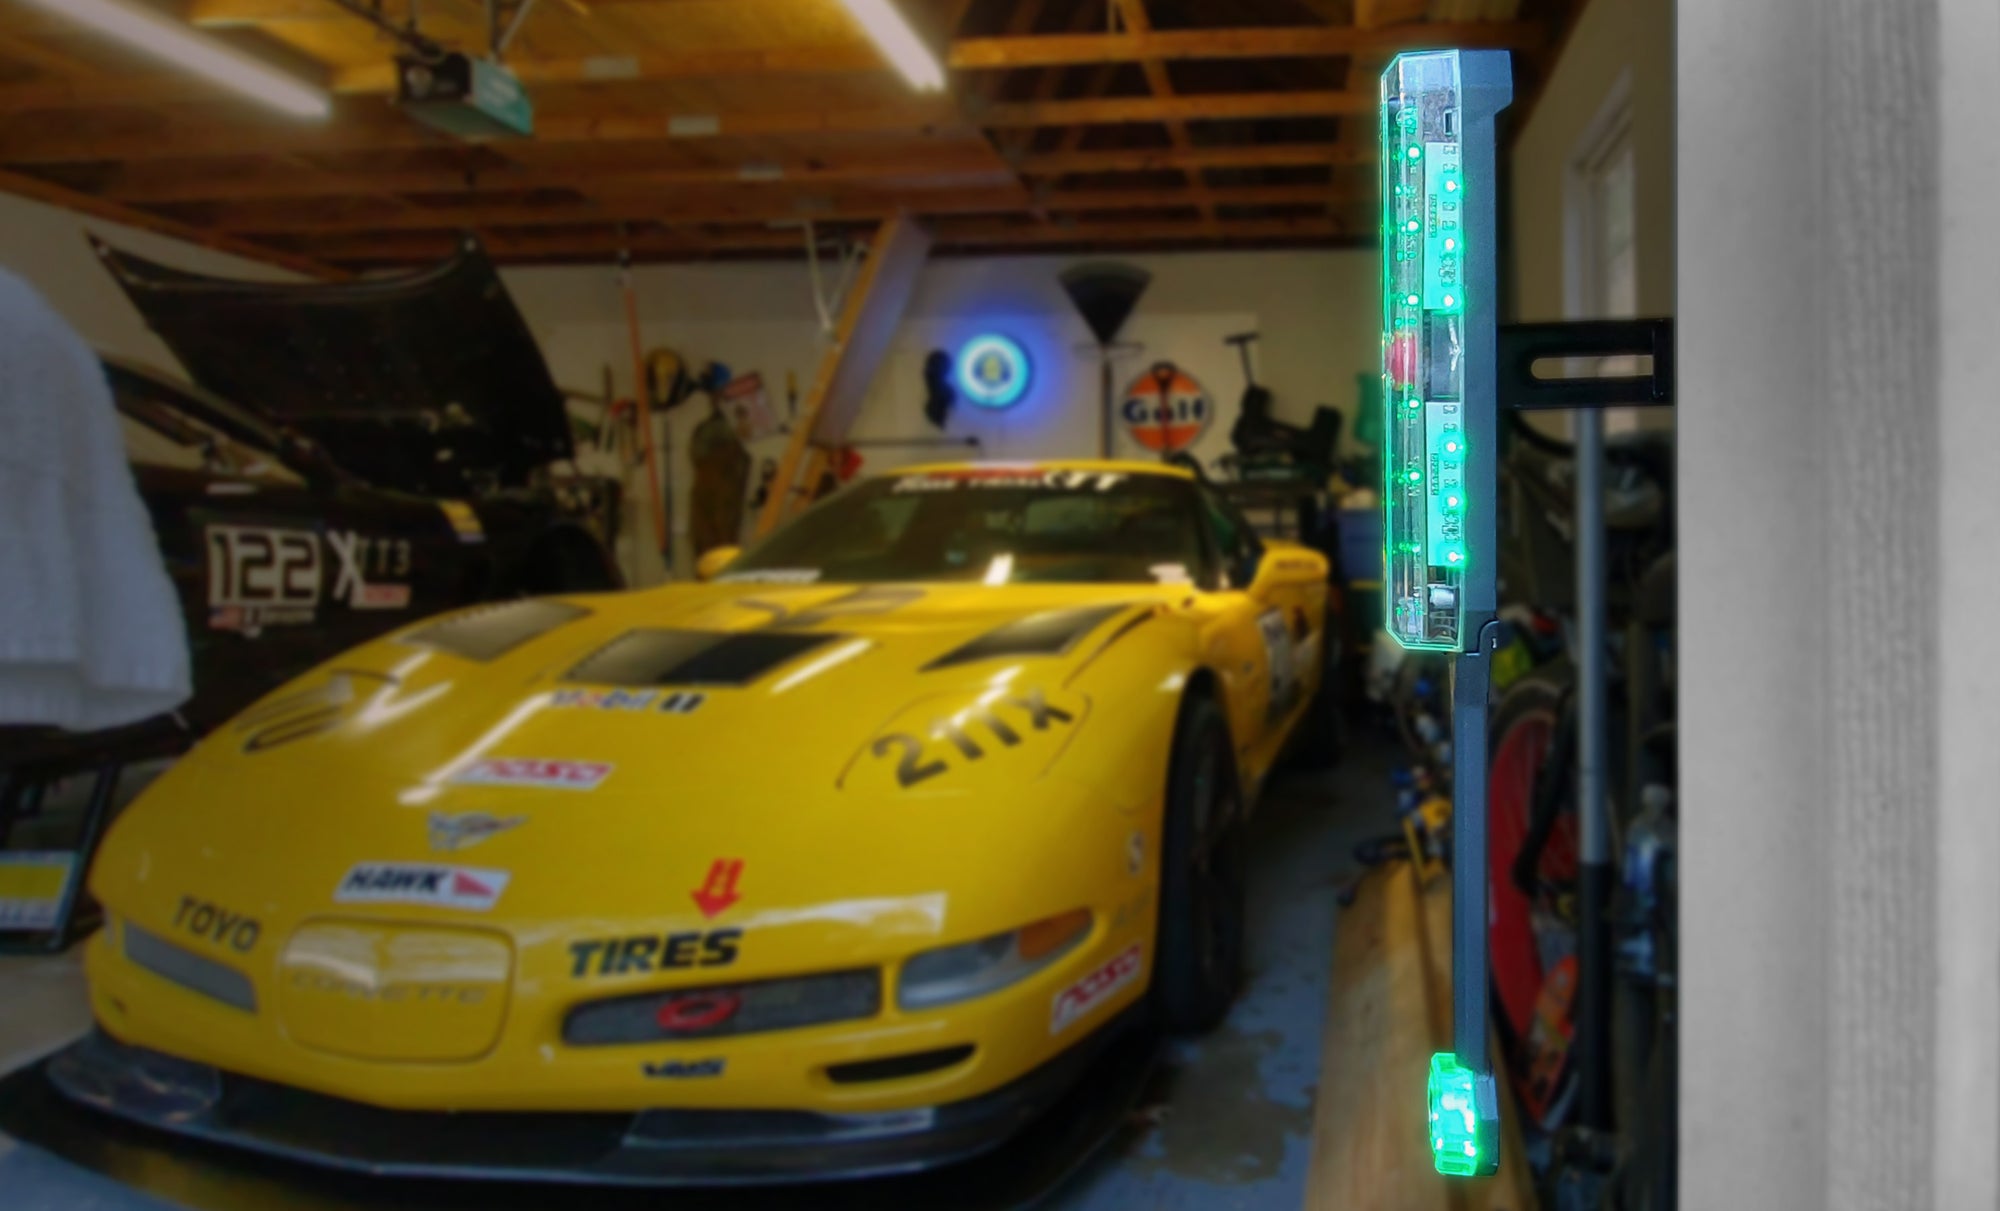 Yellow Corvette backed into a garage. STKR side sensor in the foreground.